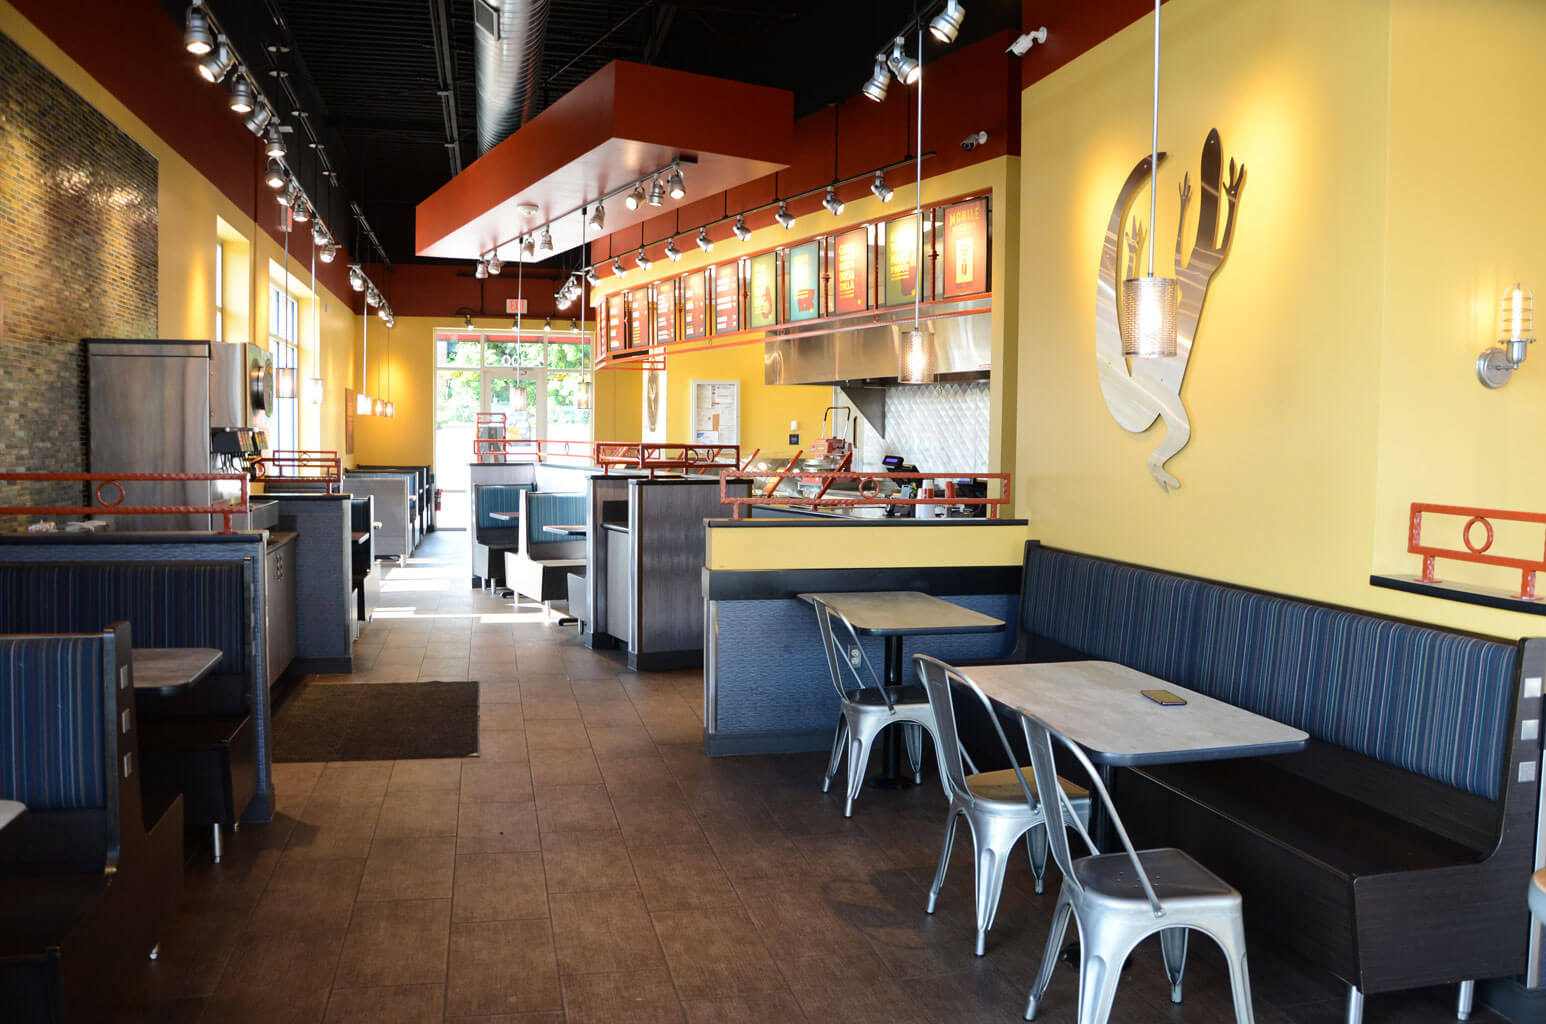 What is a Pancheros Franchise? » Top Fast Casual Restaurant Opporunity